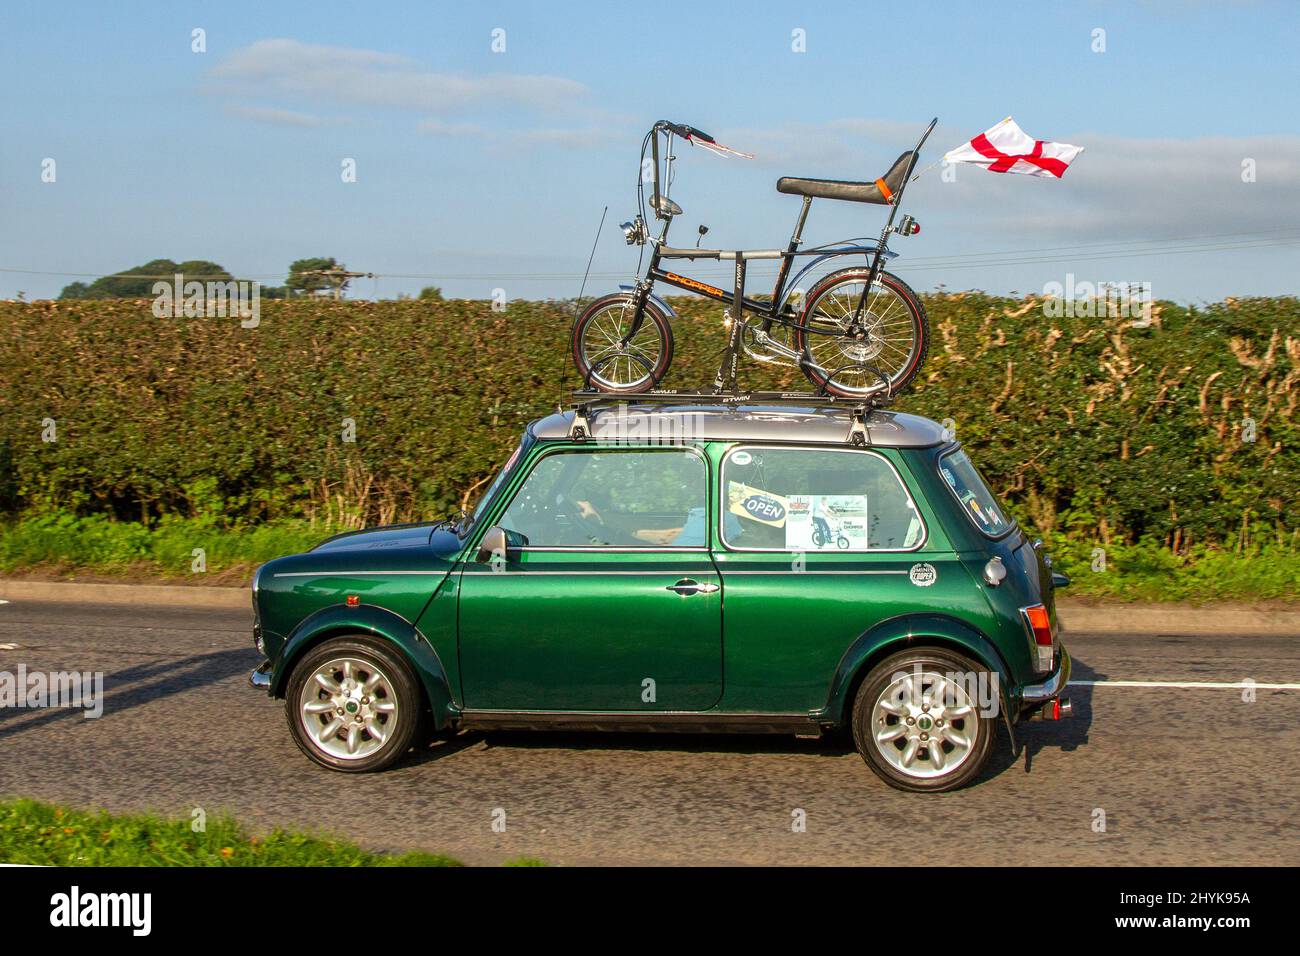 2000 green Rover Mini Cooper Sport with Chopper bicycle on roof rack flying Union Jack Flag; en-route to Capesthorne Hall classic August car show, Cheshire, UK Stock Photo